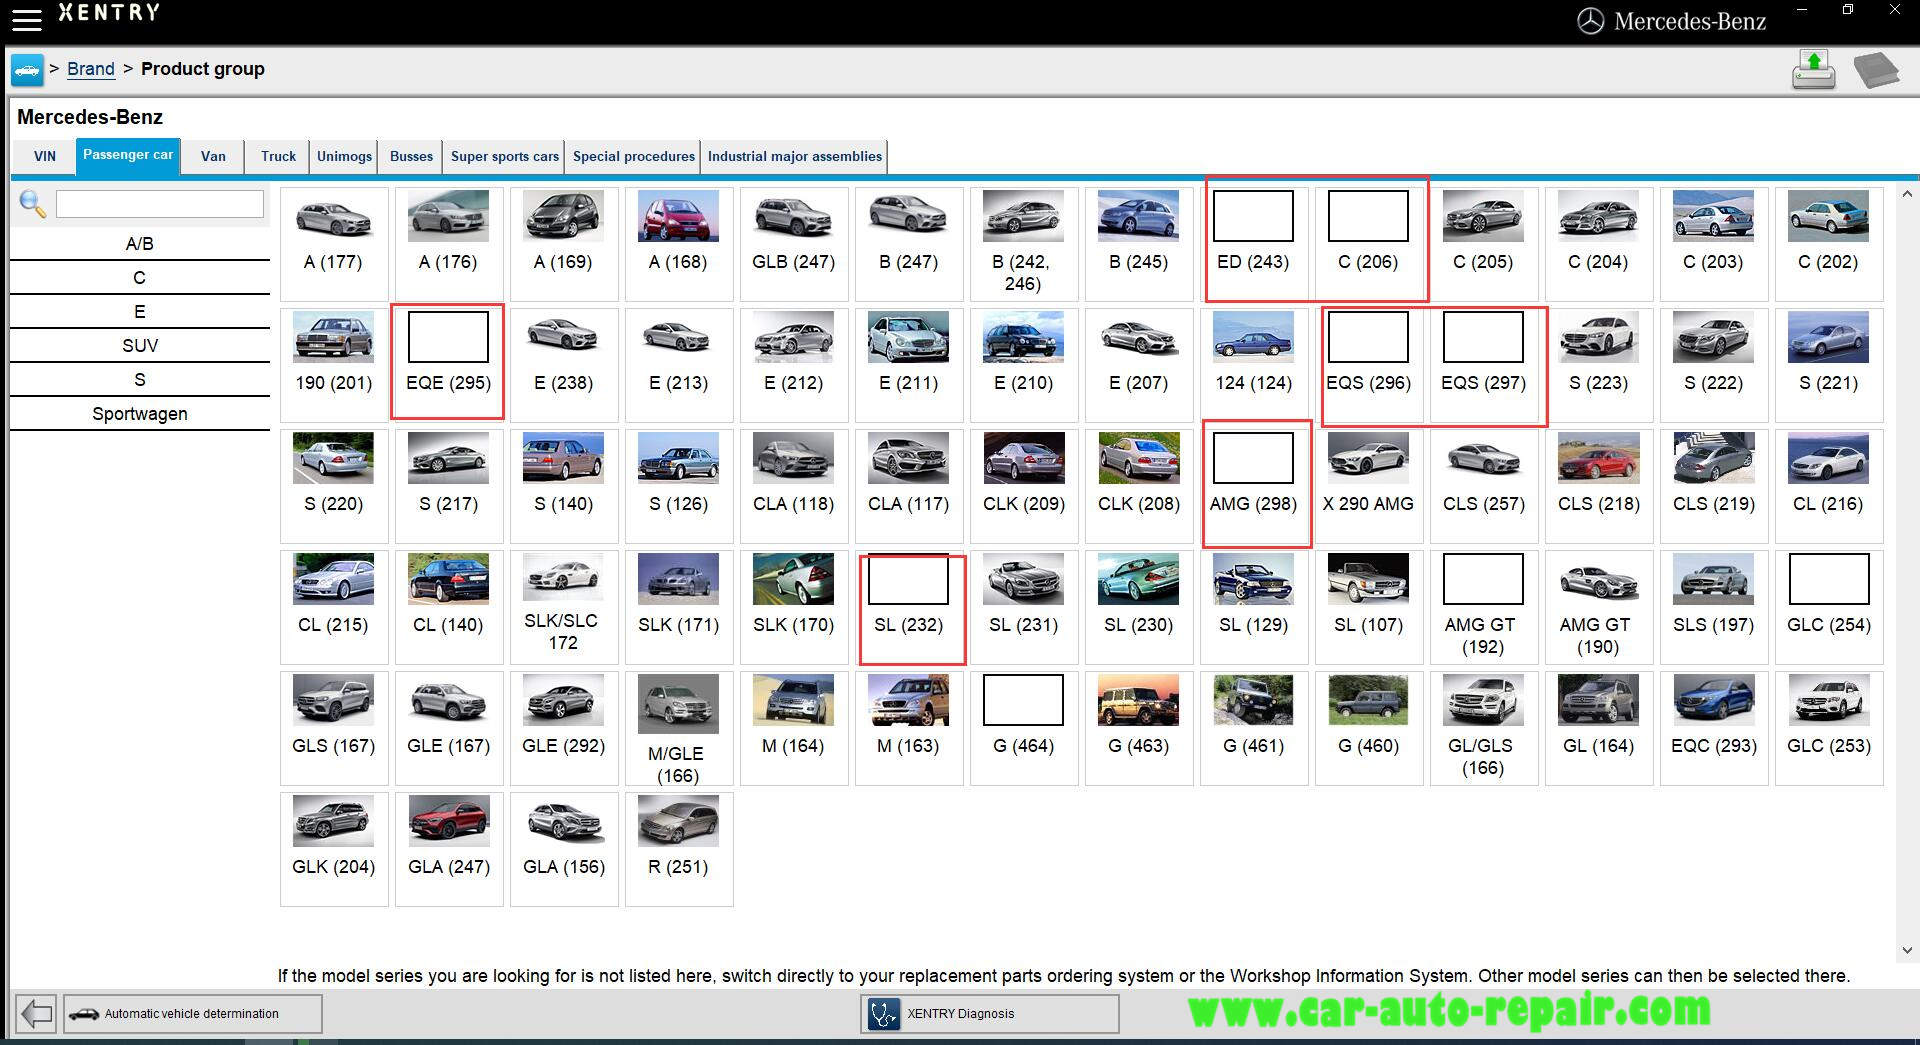 How-to-Fix-Benz-Xentry-Missing-Pictures-Problem-1